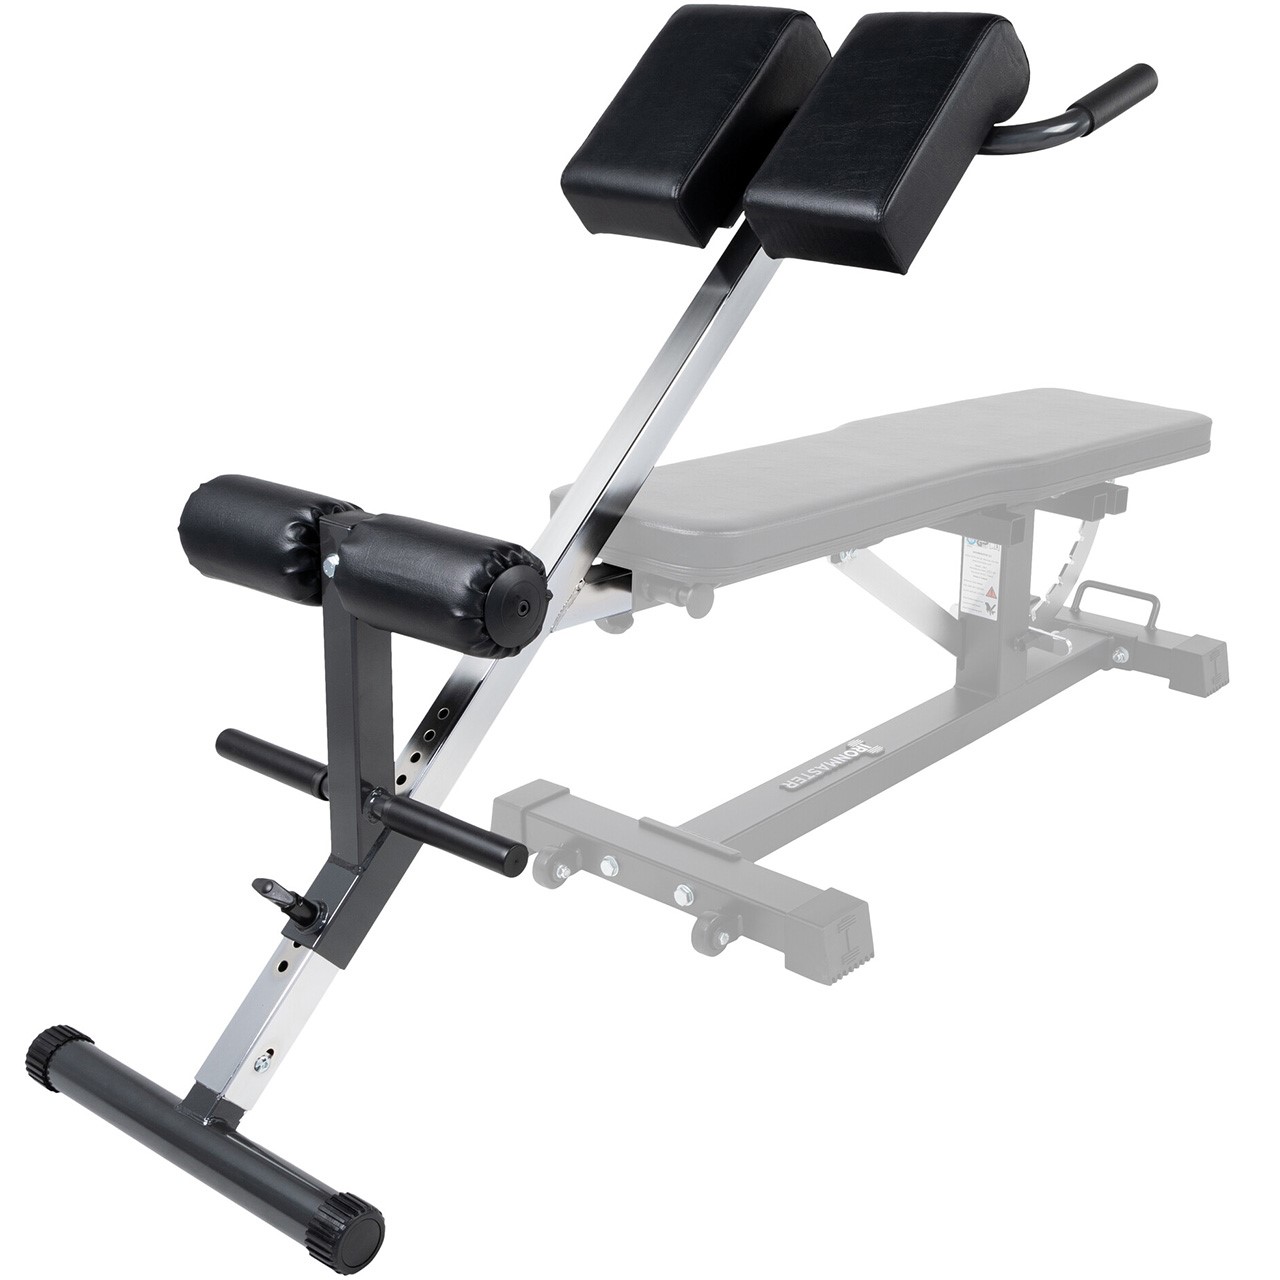 Ironmaster Hypercore Attachment (for Super Bench & Super Bench Pro)